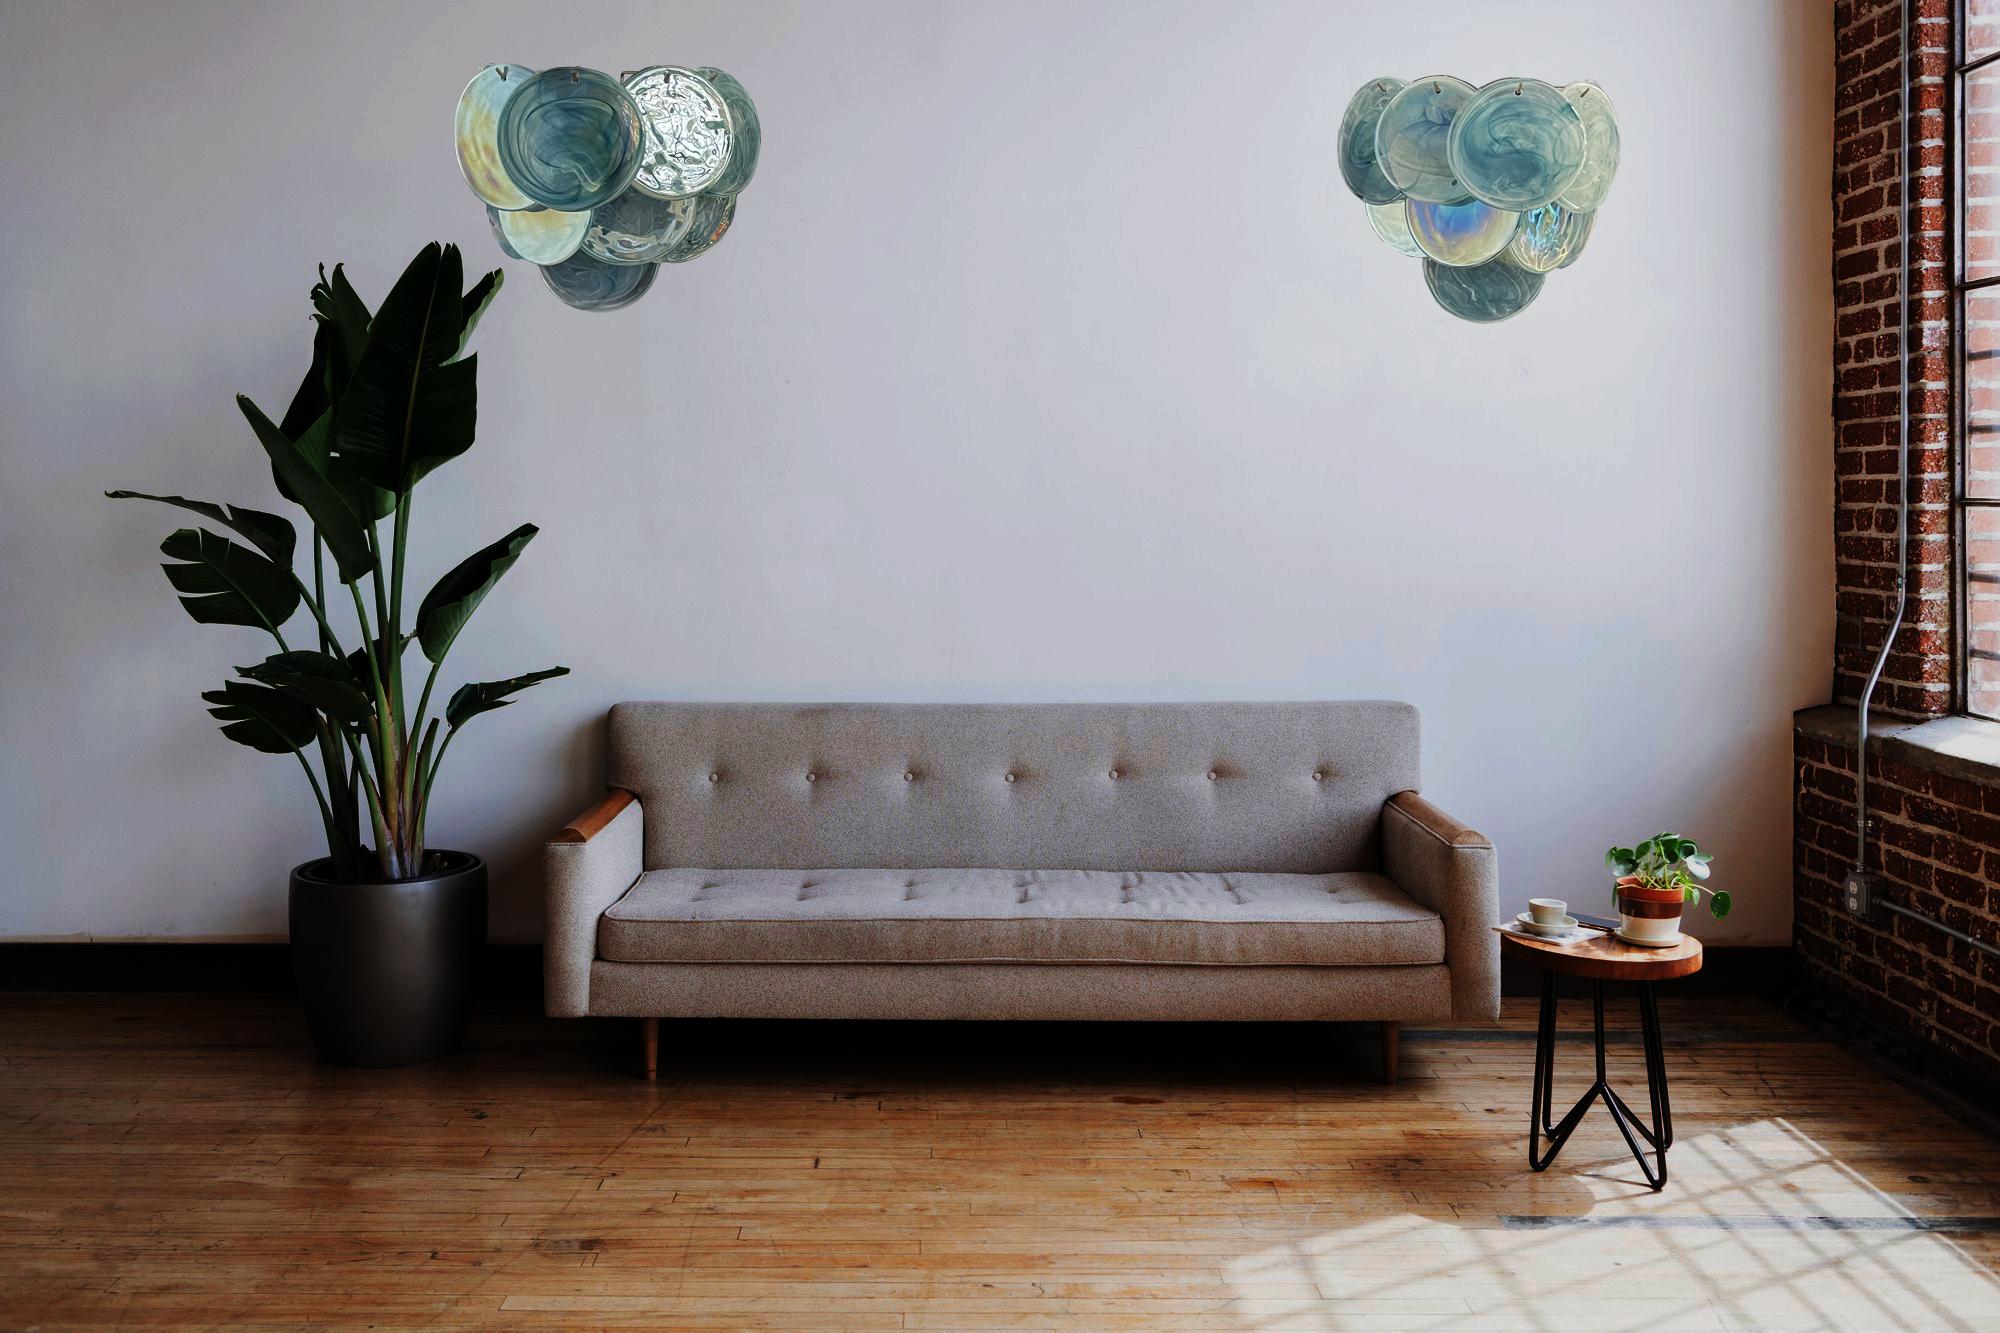 
Pair of Vintage Italian Murano appliques in Vistosi style. Wall lights have 10 glass for each, iridescent alabaster blue discs. The glasses are now unavailable, they have the particularity of reflecting a multiplicity of colors, which makes the